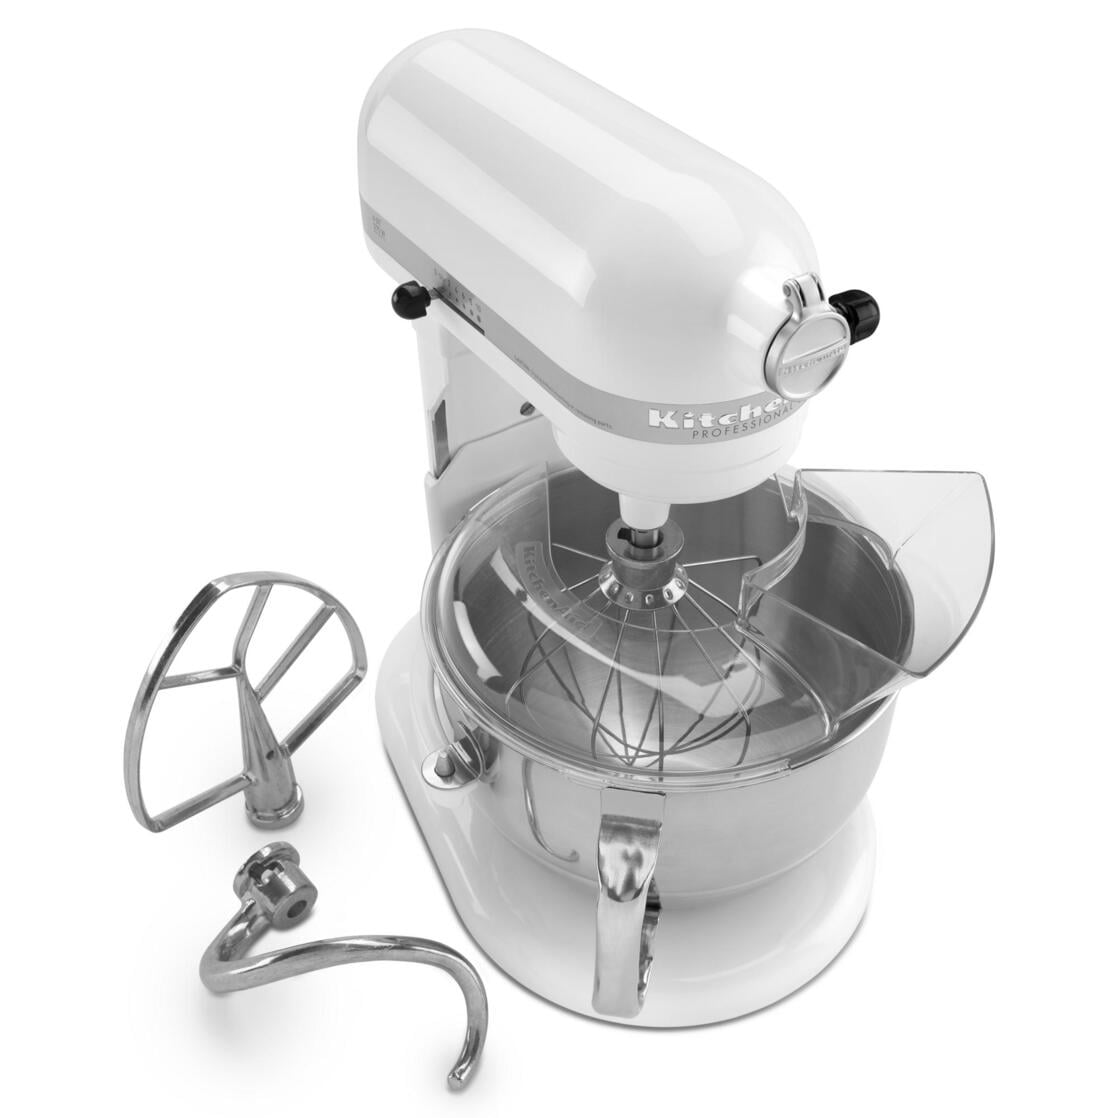  KitchenAid KP26M1XWH 6 Qt. Professional 600 Series Bowl-Lift Stand  Mixer - White: Electric Stand Mixers: Home & Kitchen